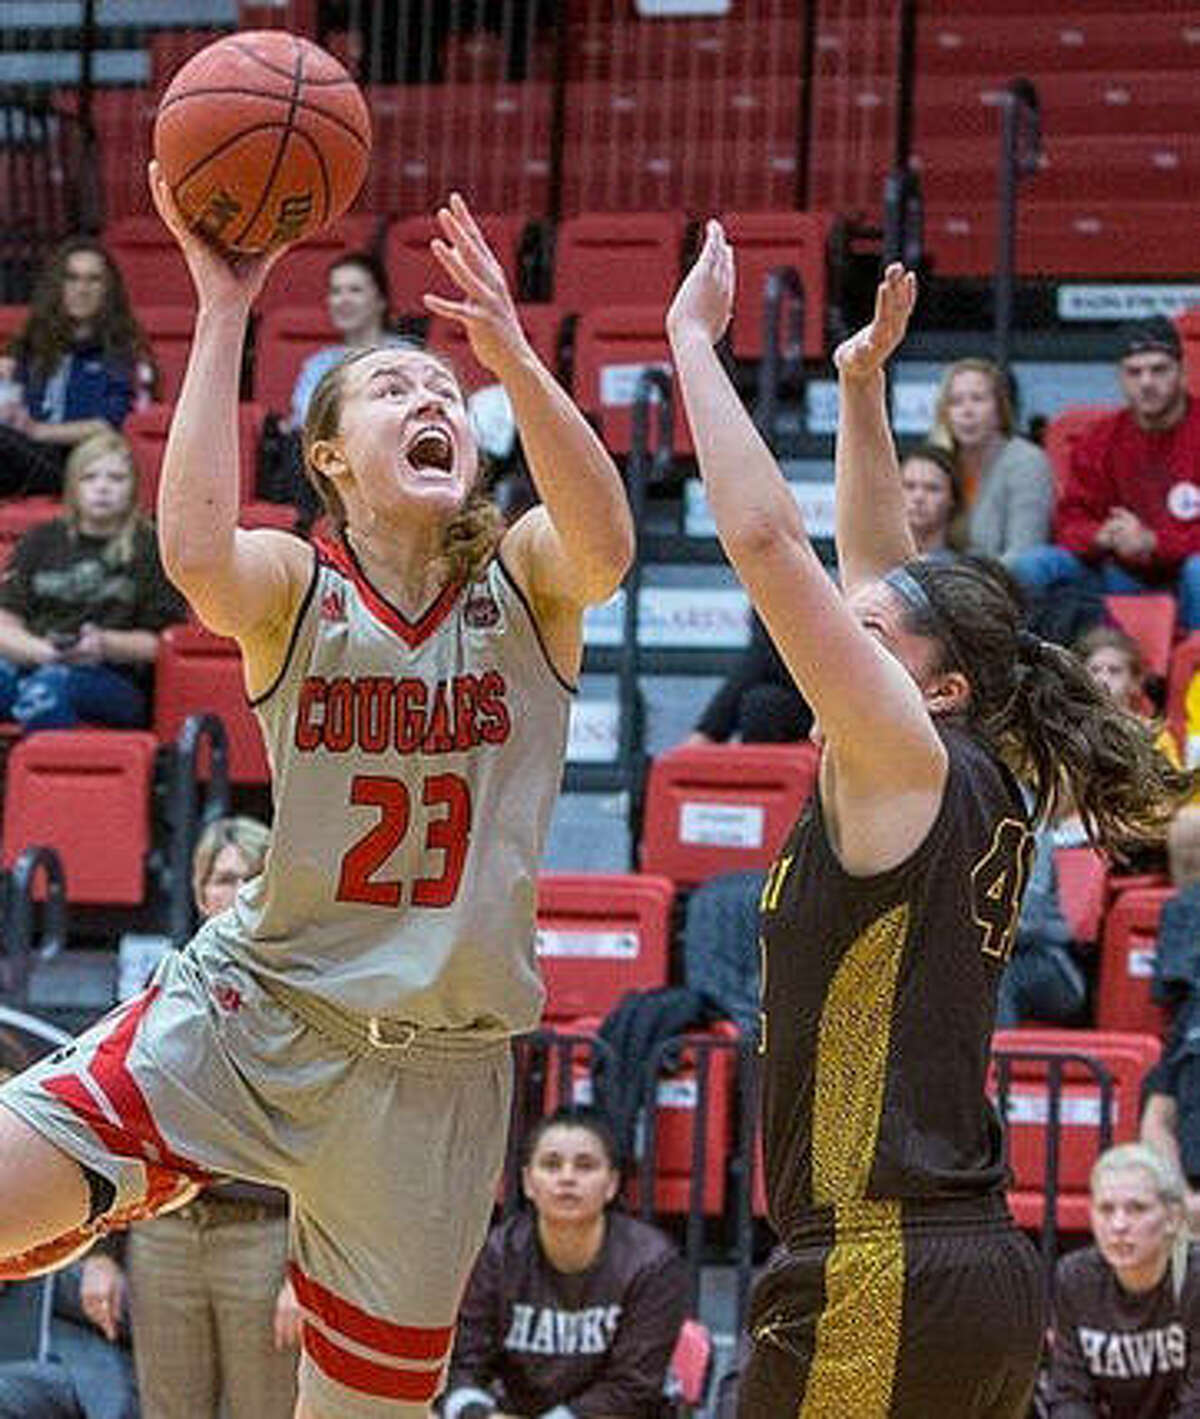 SIUE’s Allie Troeckler (23), shown putting up a shot in the lane in a game earlier this season in Edwardsville, scored 10 points Sunday to lead the Cougars in a loss at Missouri.